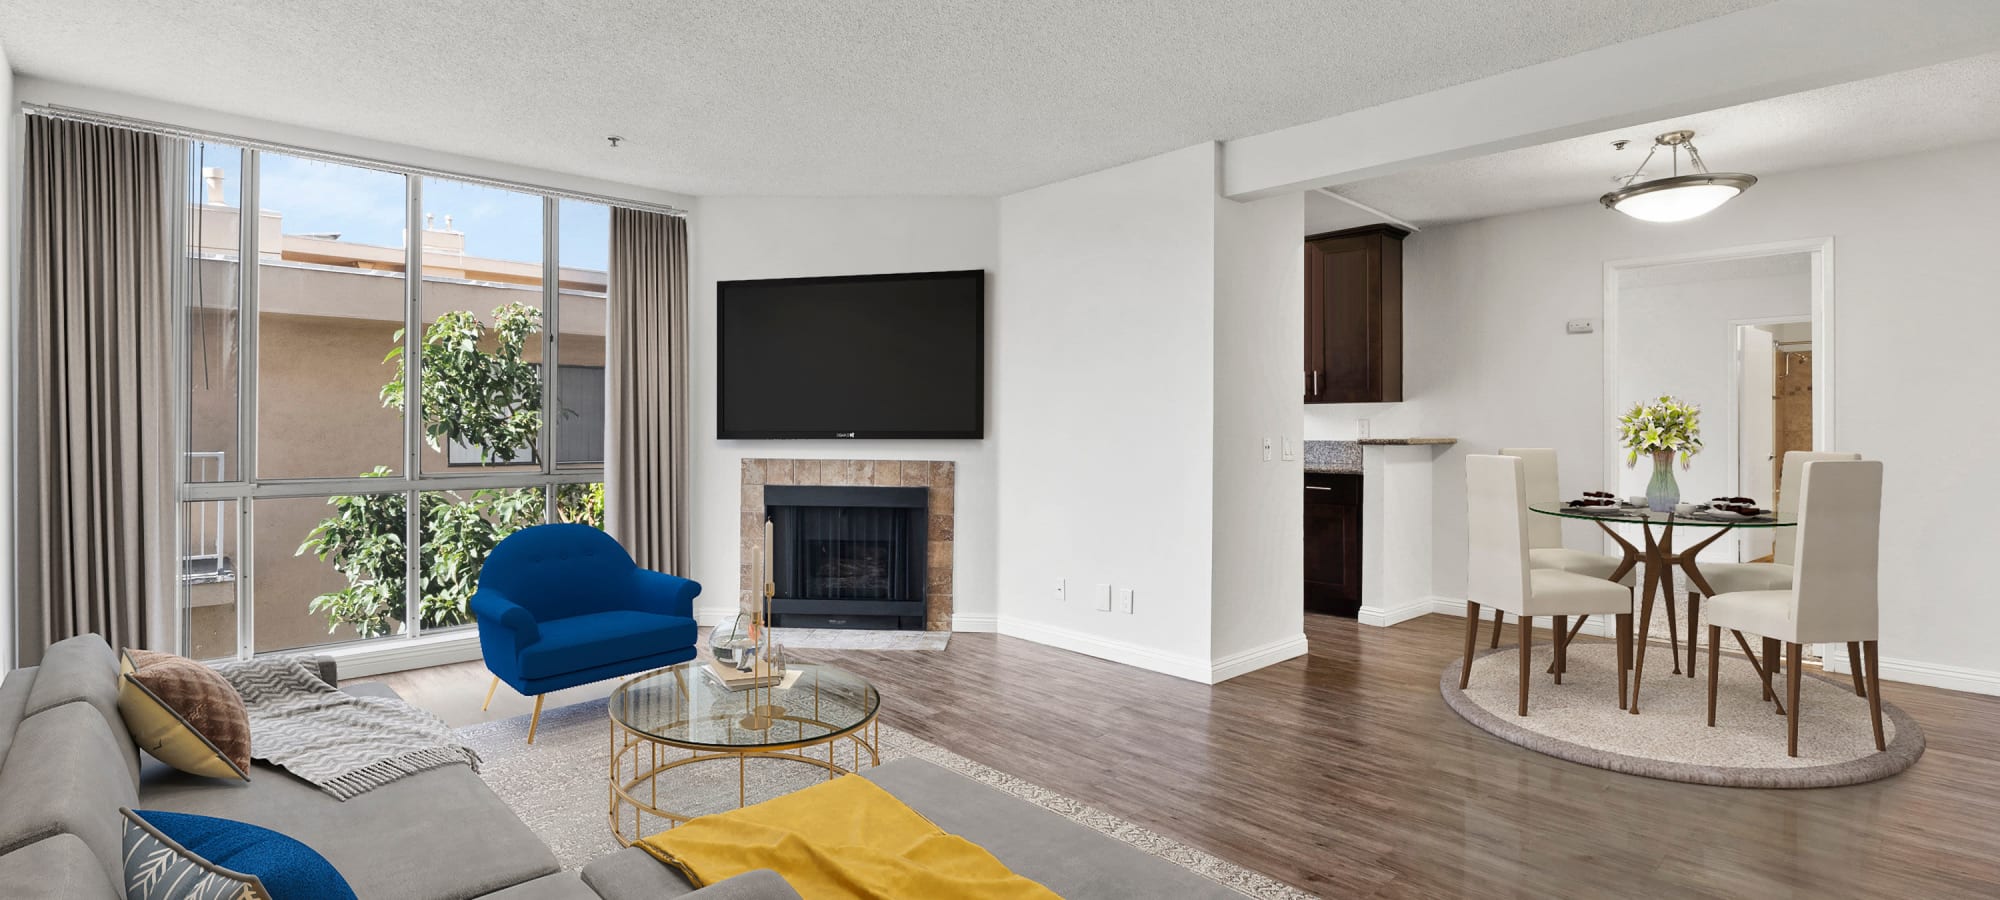 Well decorated model living room at The Jessica Apartments, Los Angeles, California